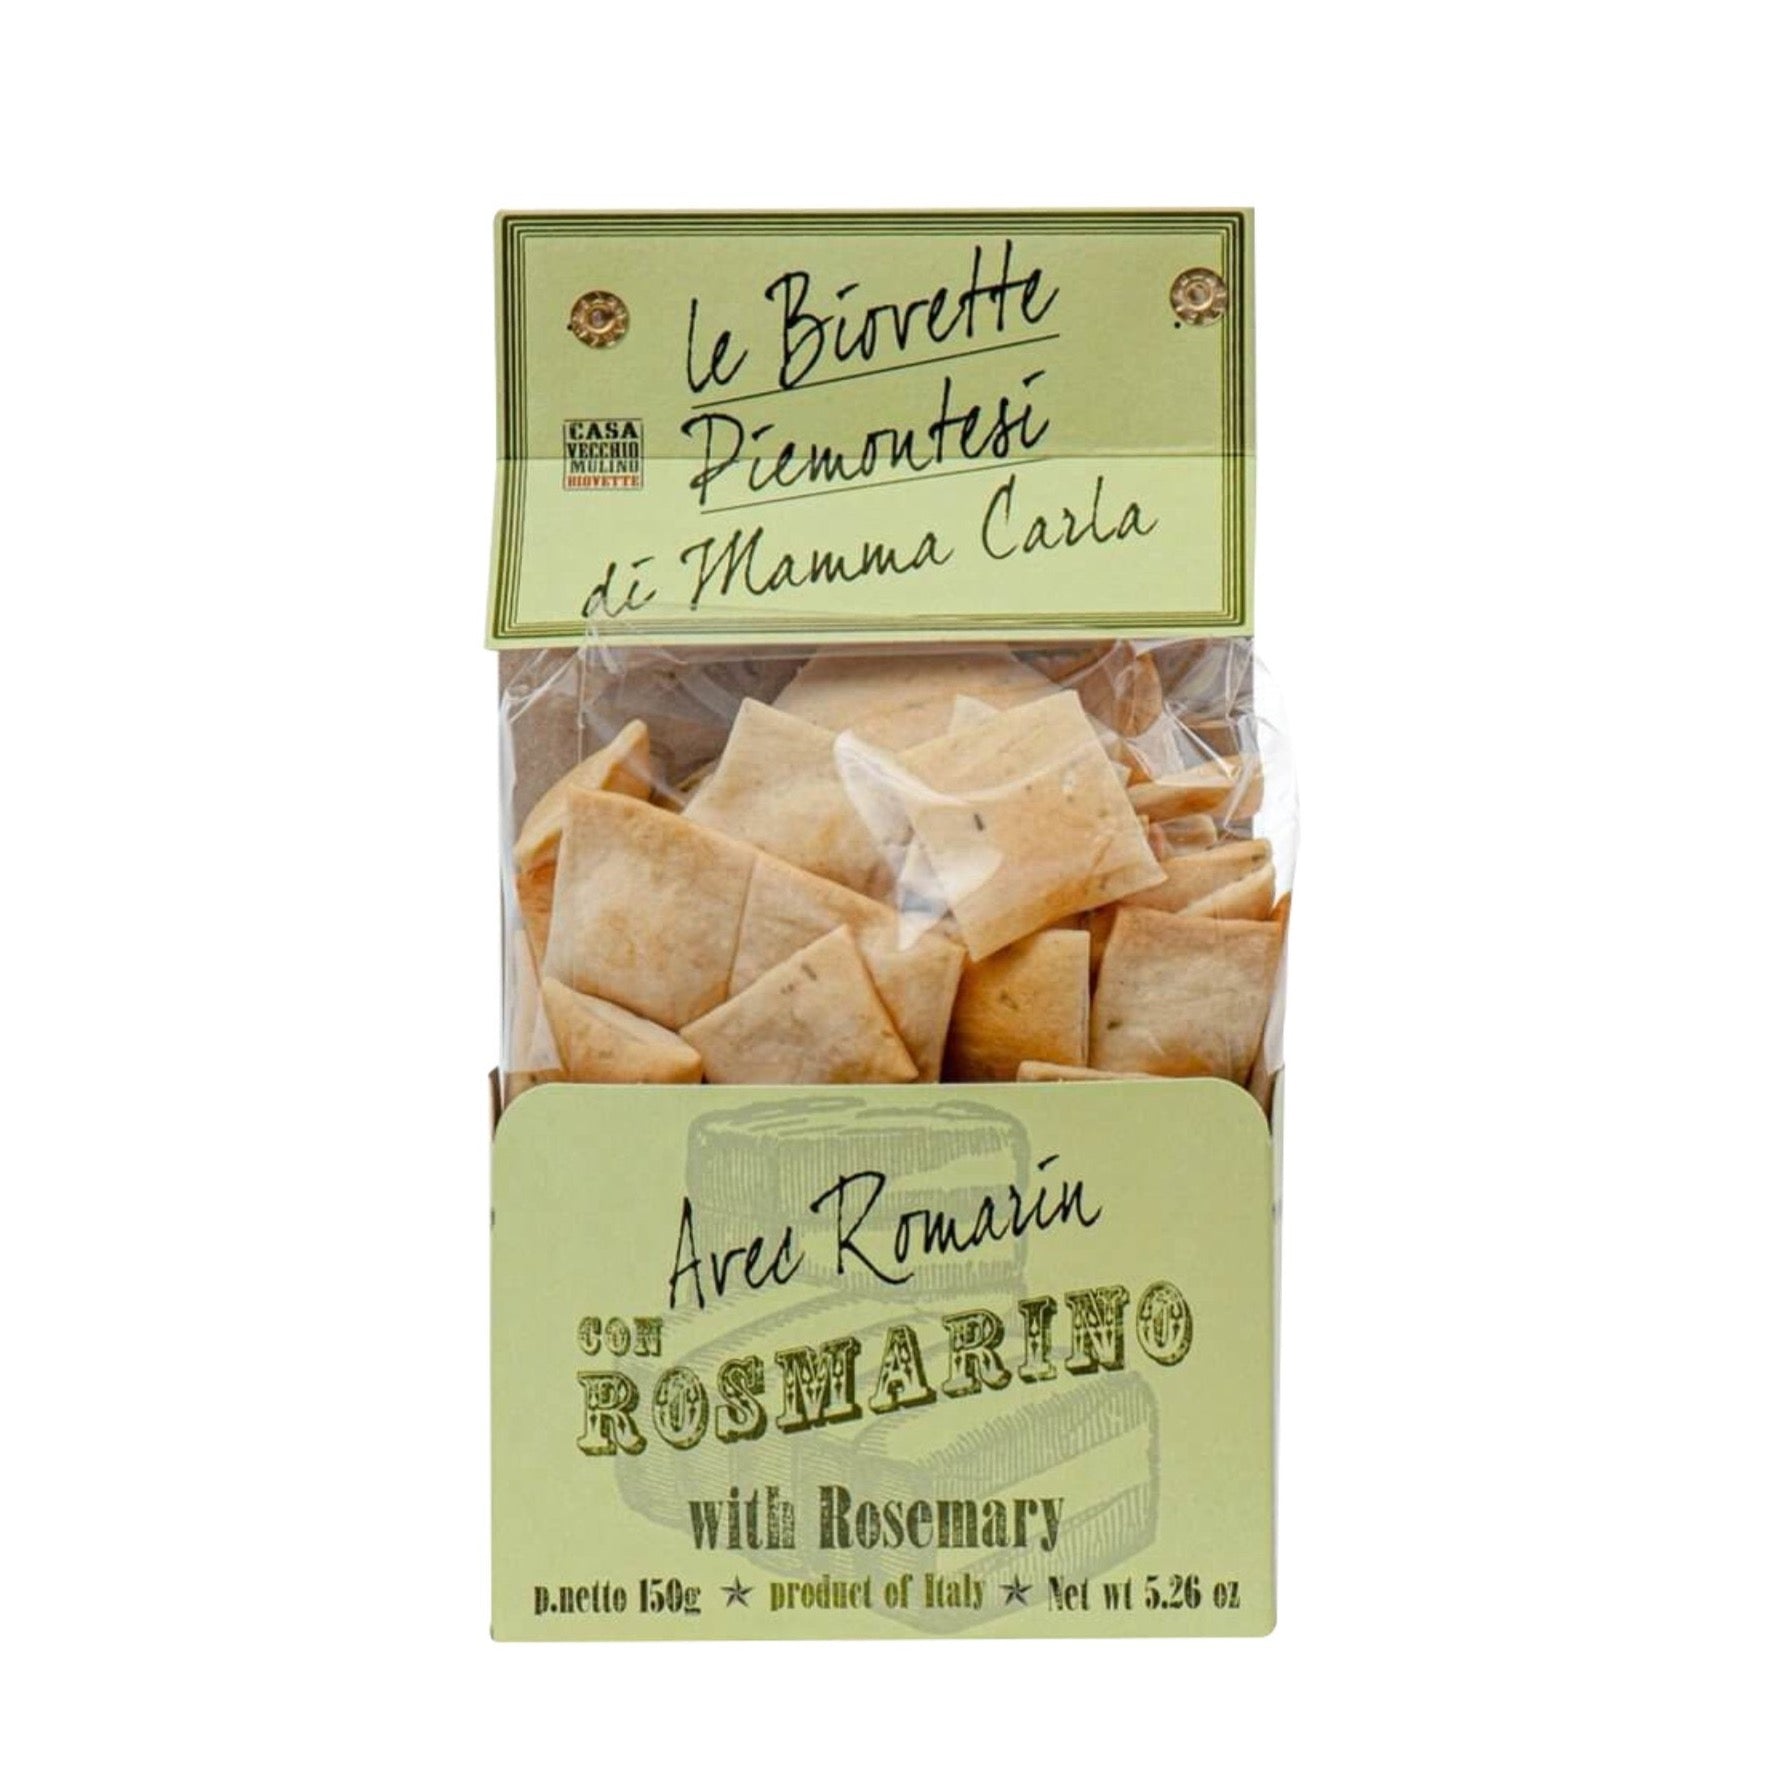 Casa Vecchio Mulino Biovette with Rosemary 150g  | Imported and distributed in the UK by Just Gourmet Foods